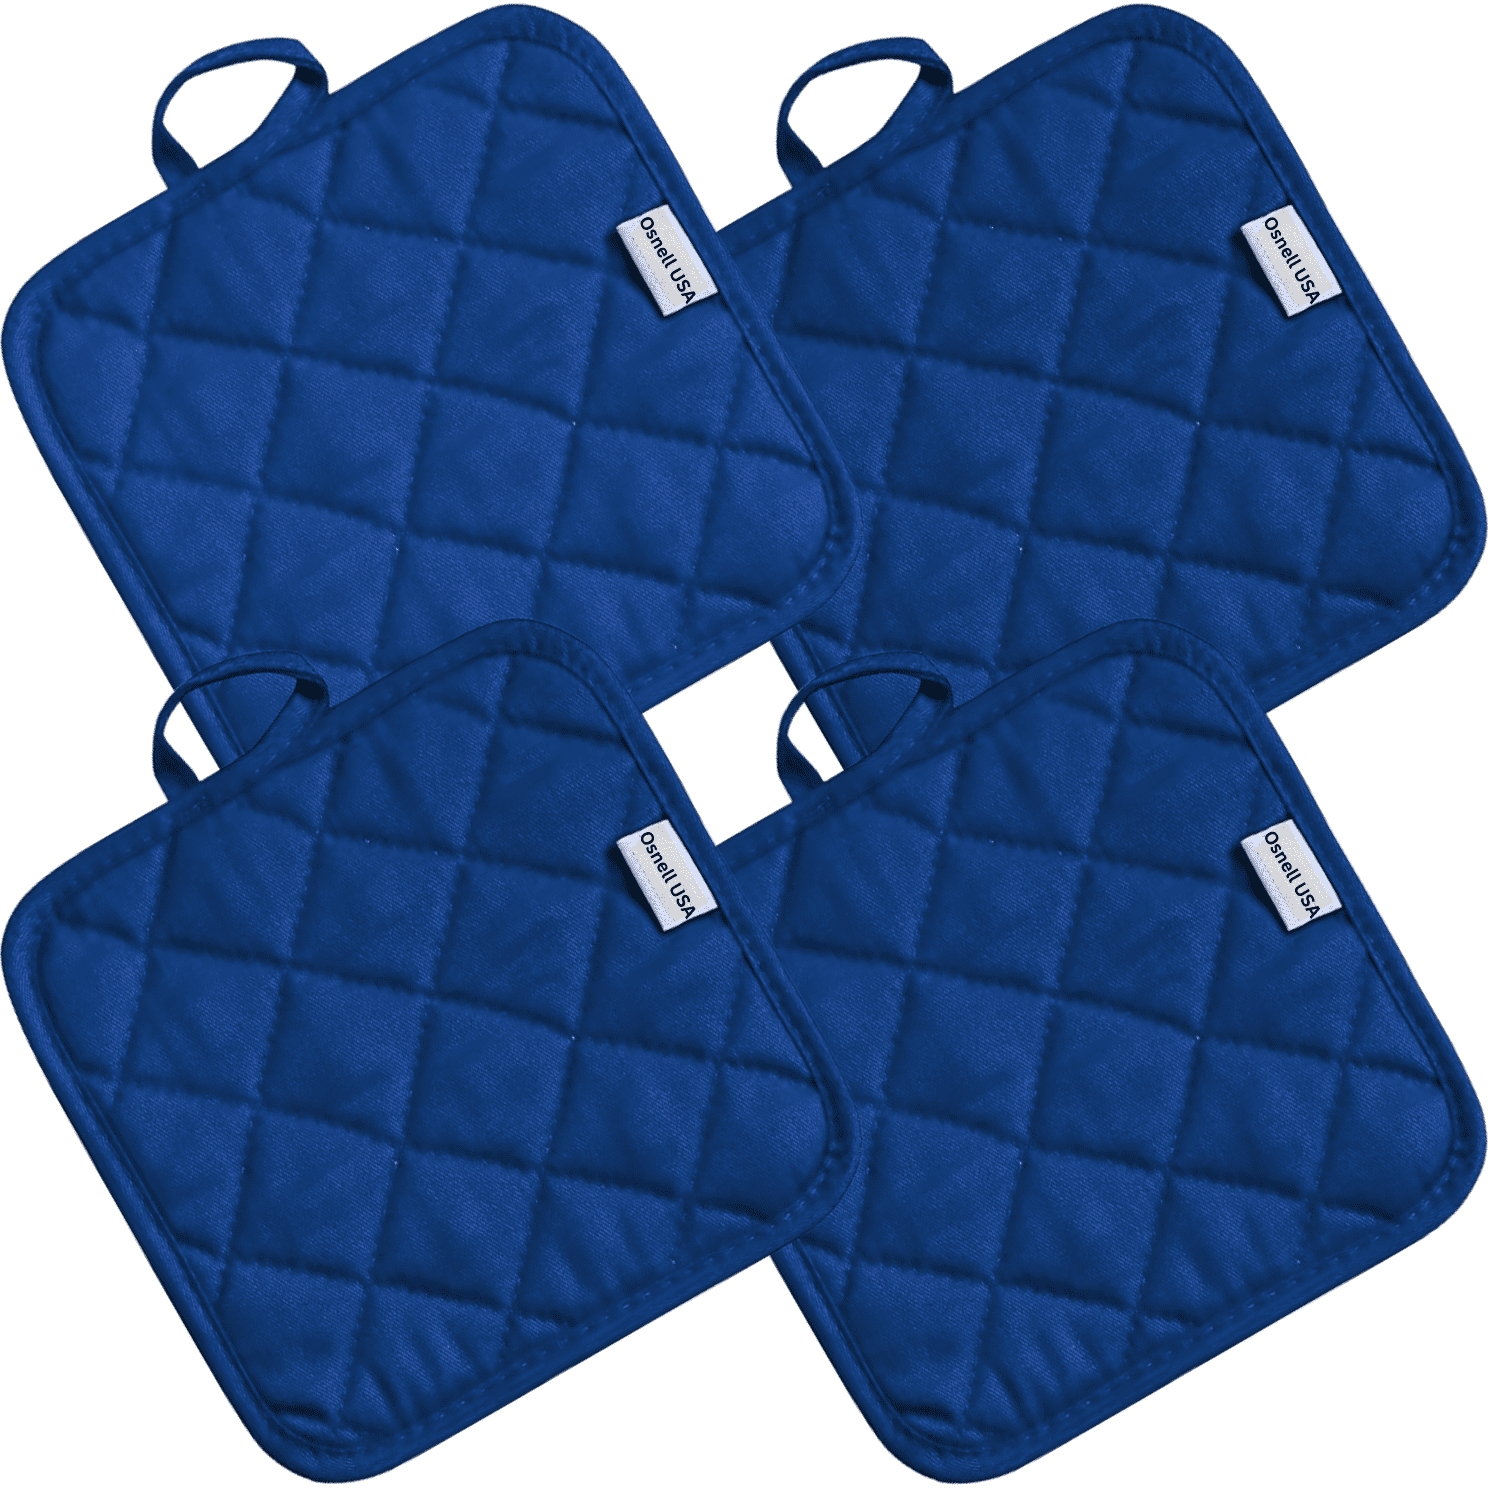 CUISINART POT HOLDERS HOT PADS (2) NAVY BLUE SQUARE WITH HANGING LOOP NWT